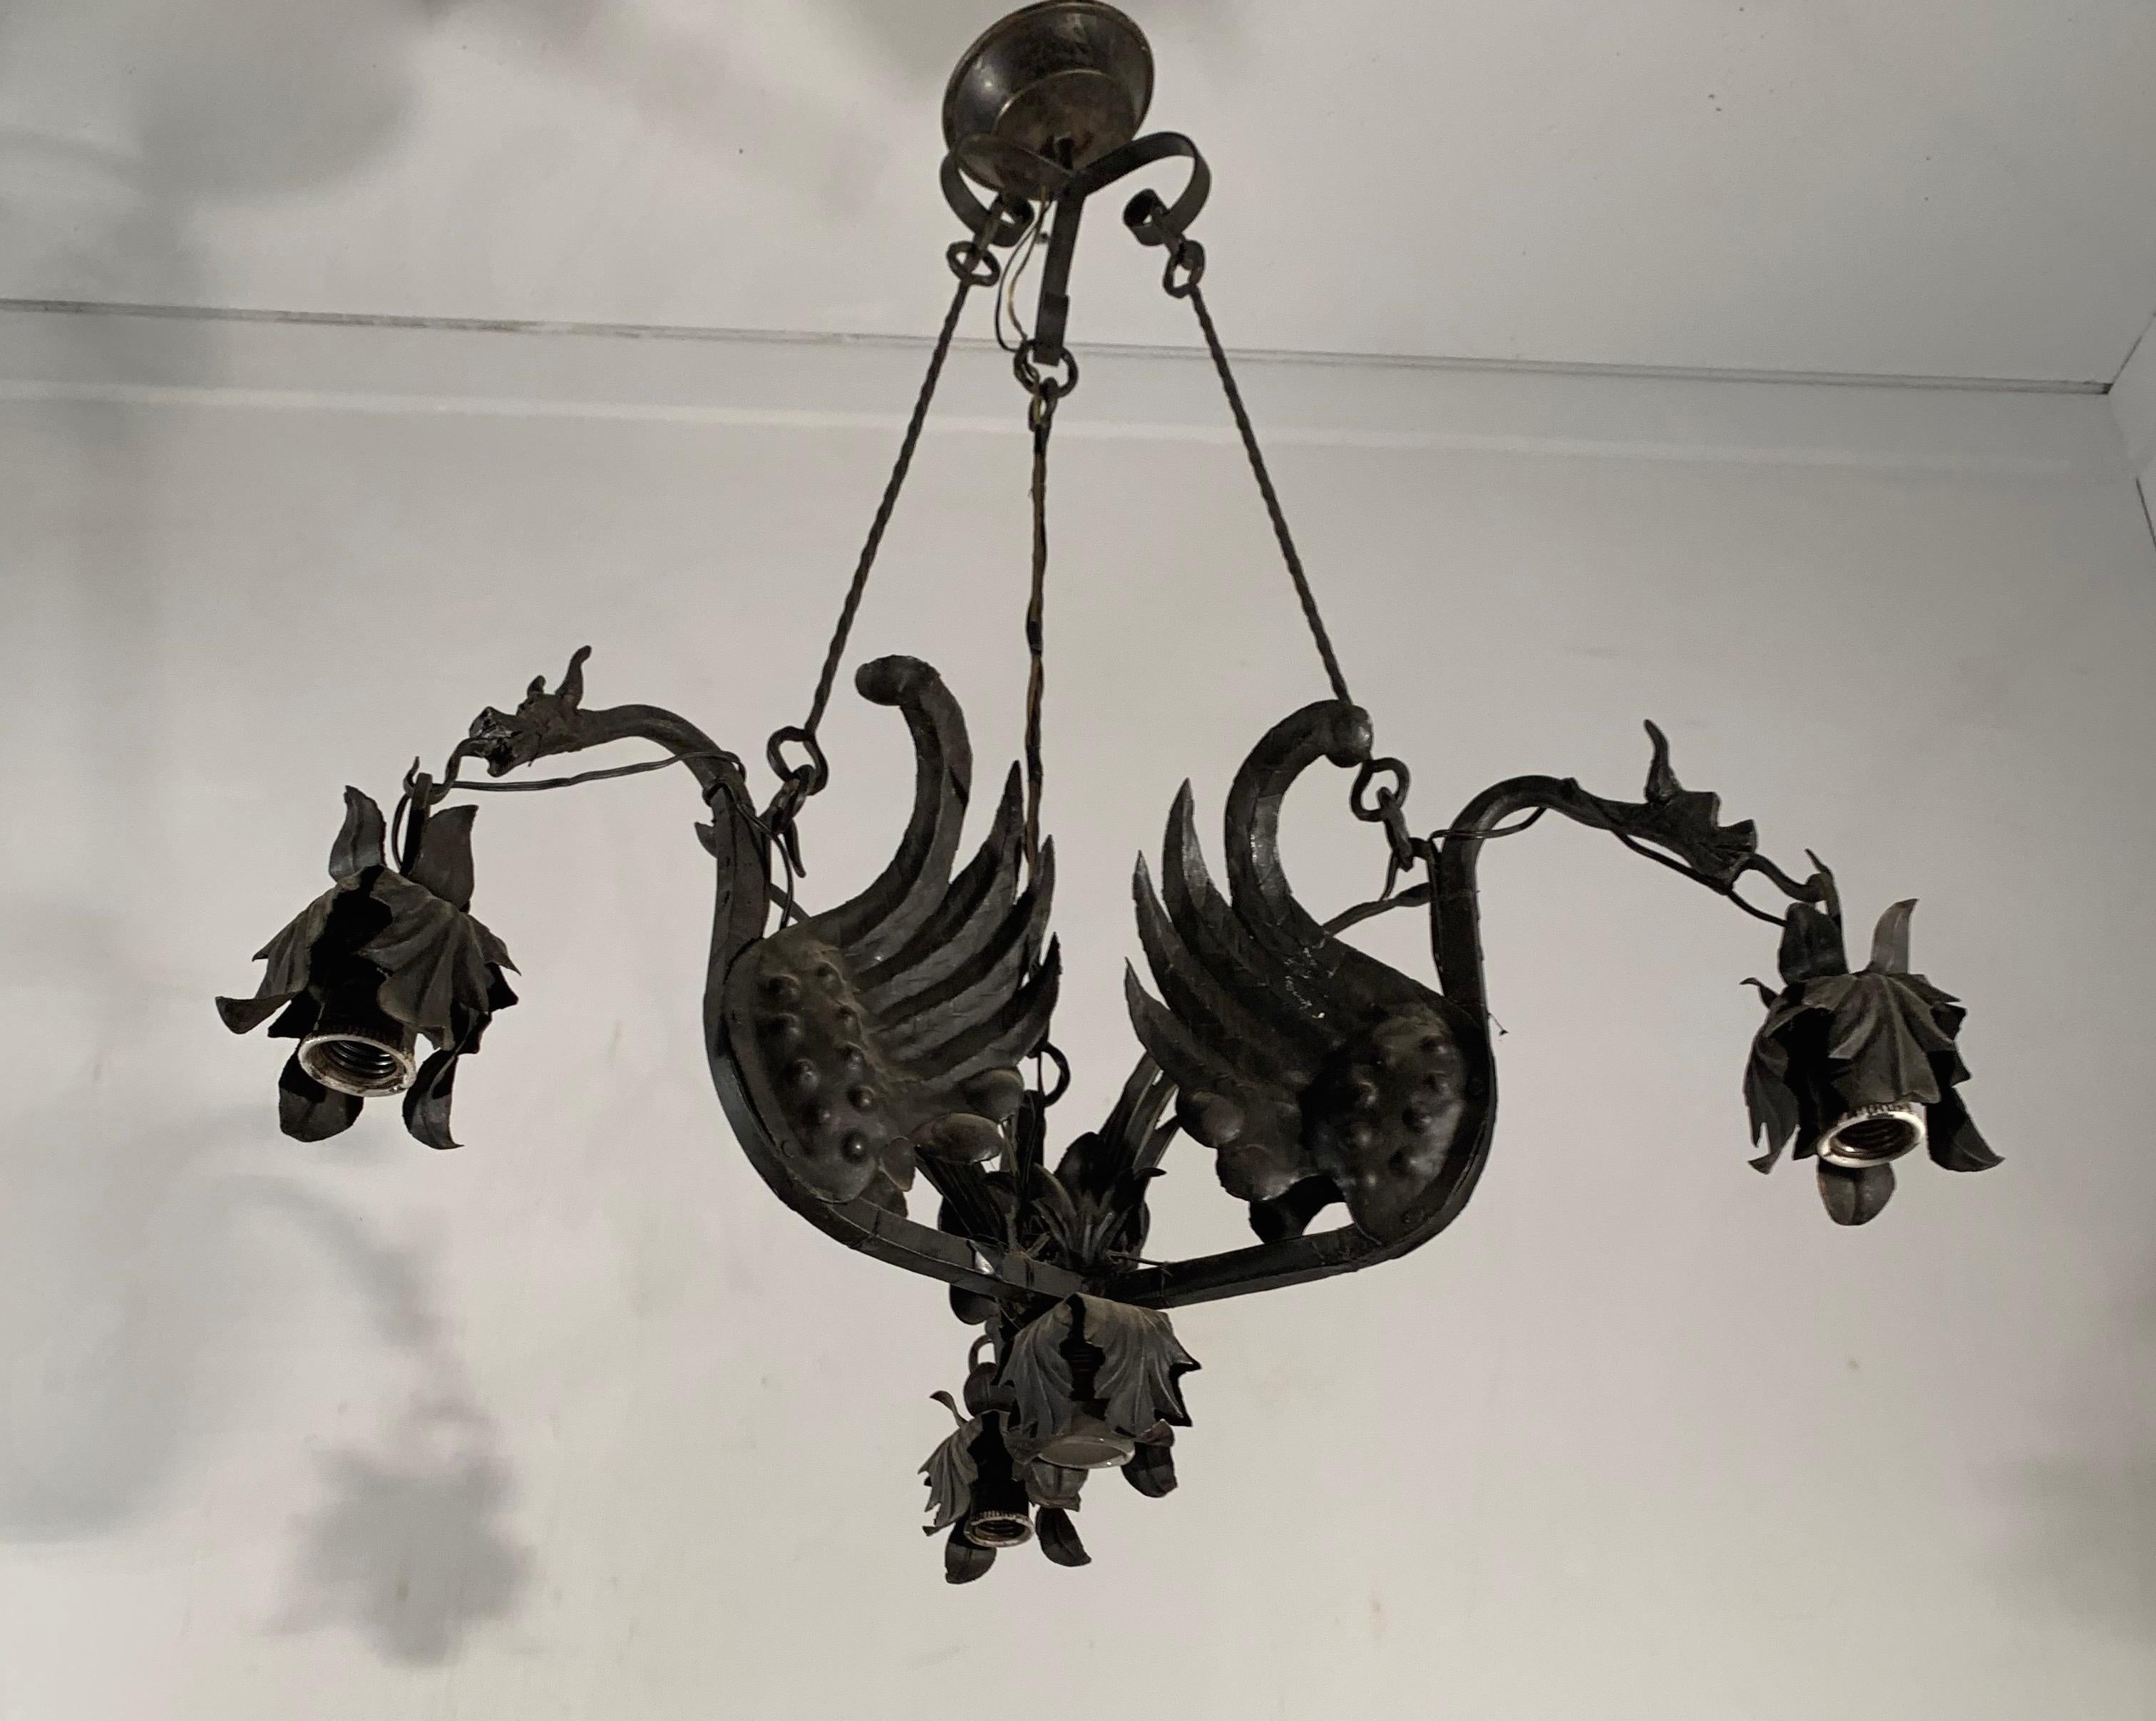 Awesome Italian Pendant / Metal Art Light Fixture with Flying Dragon Sculptures 5